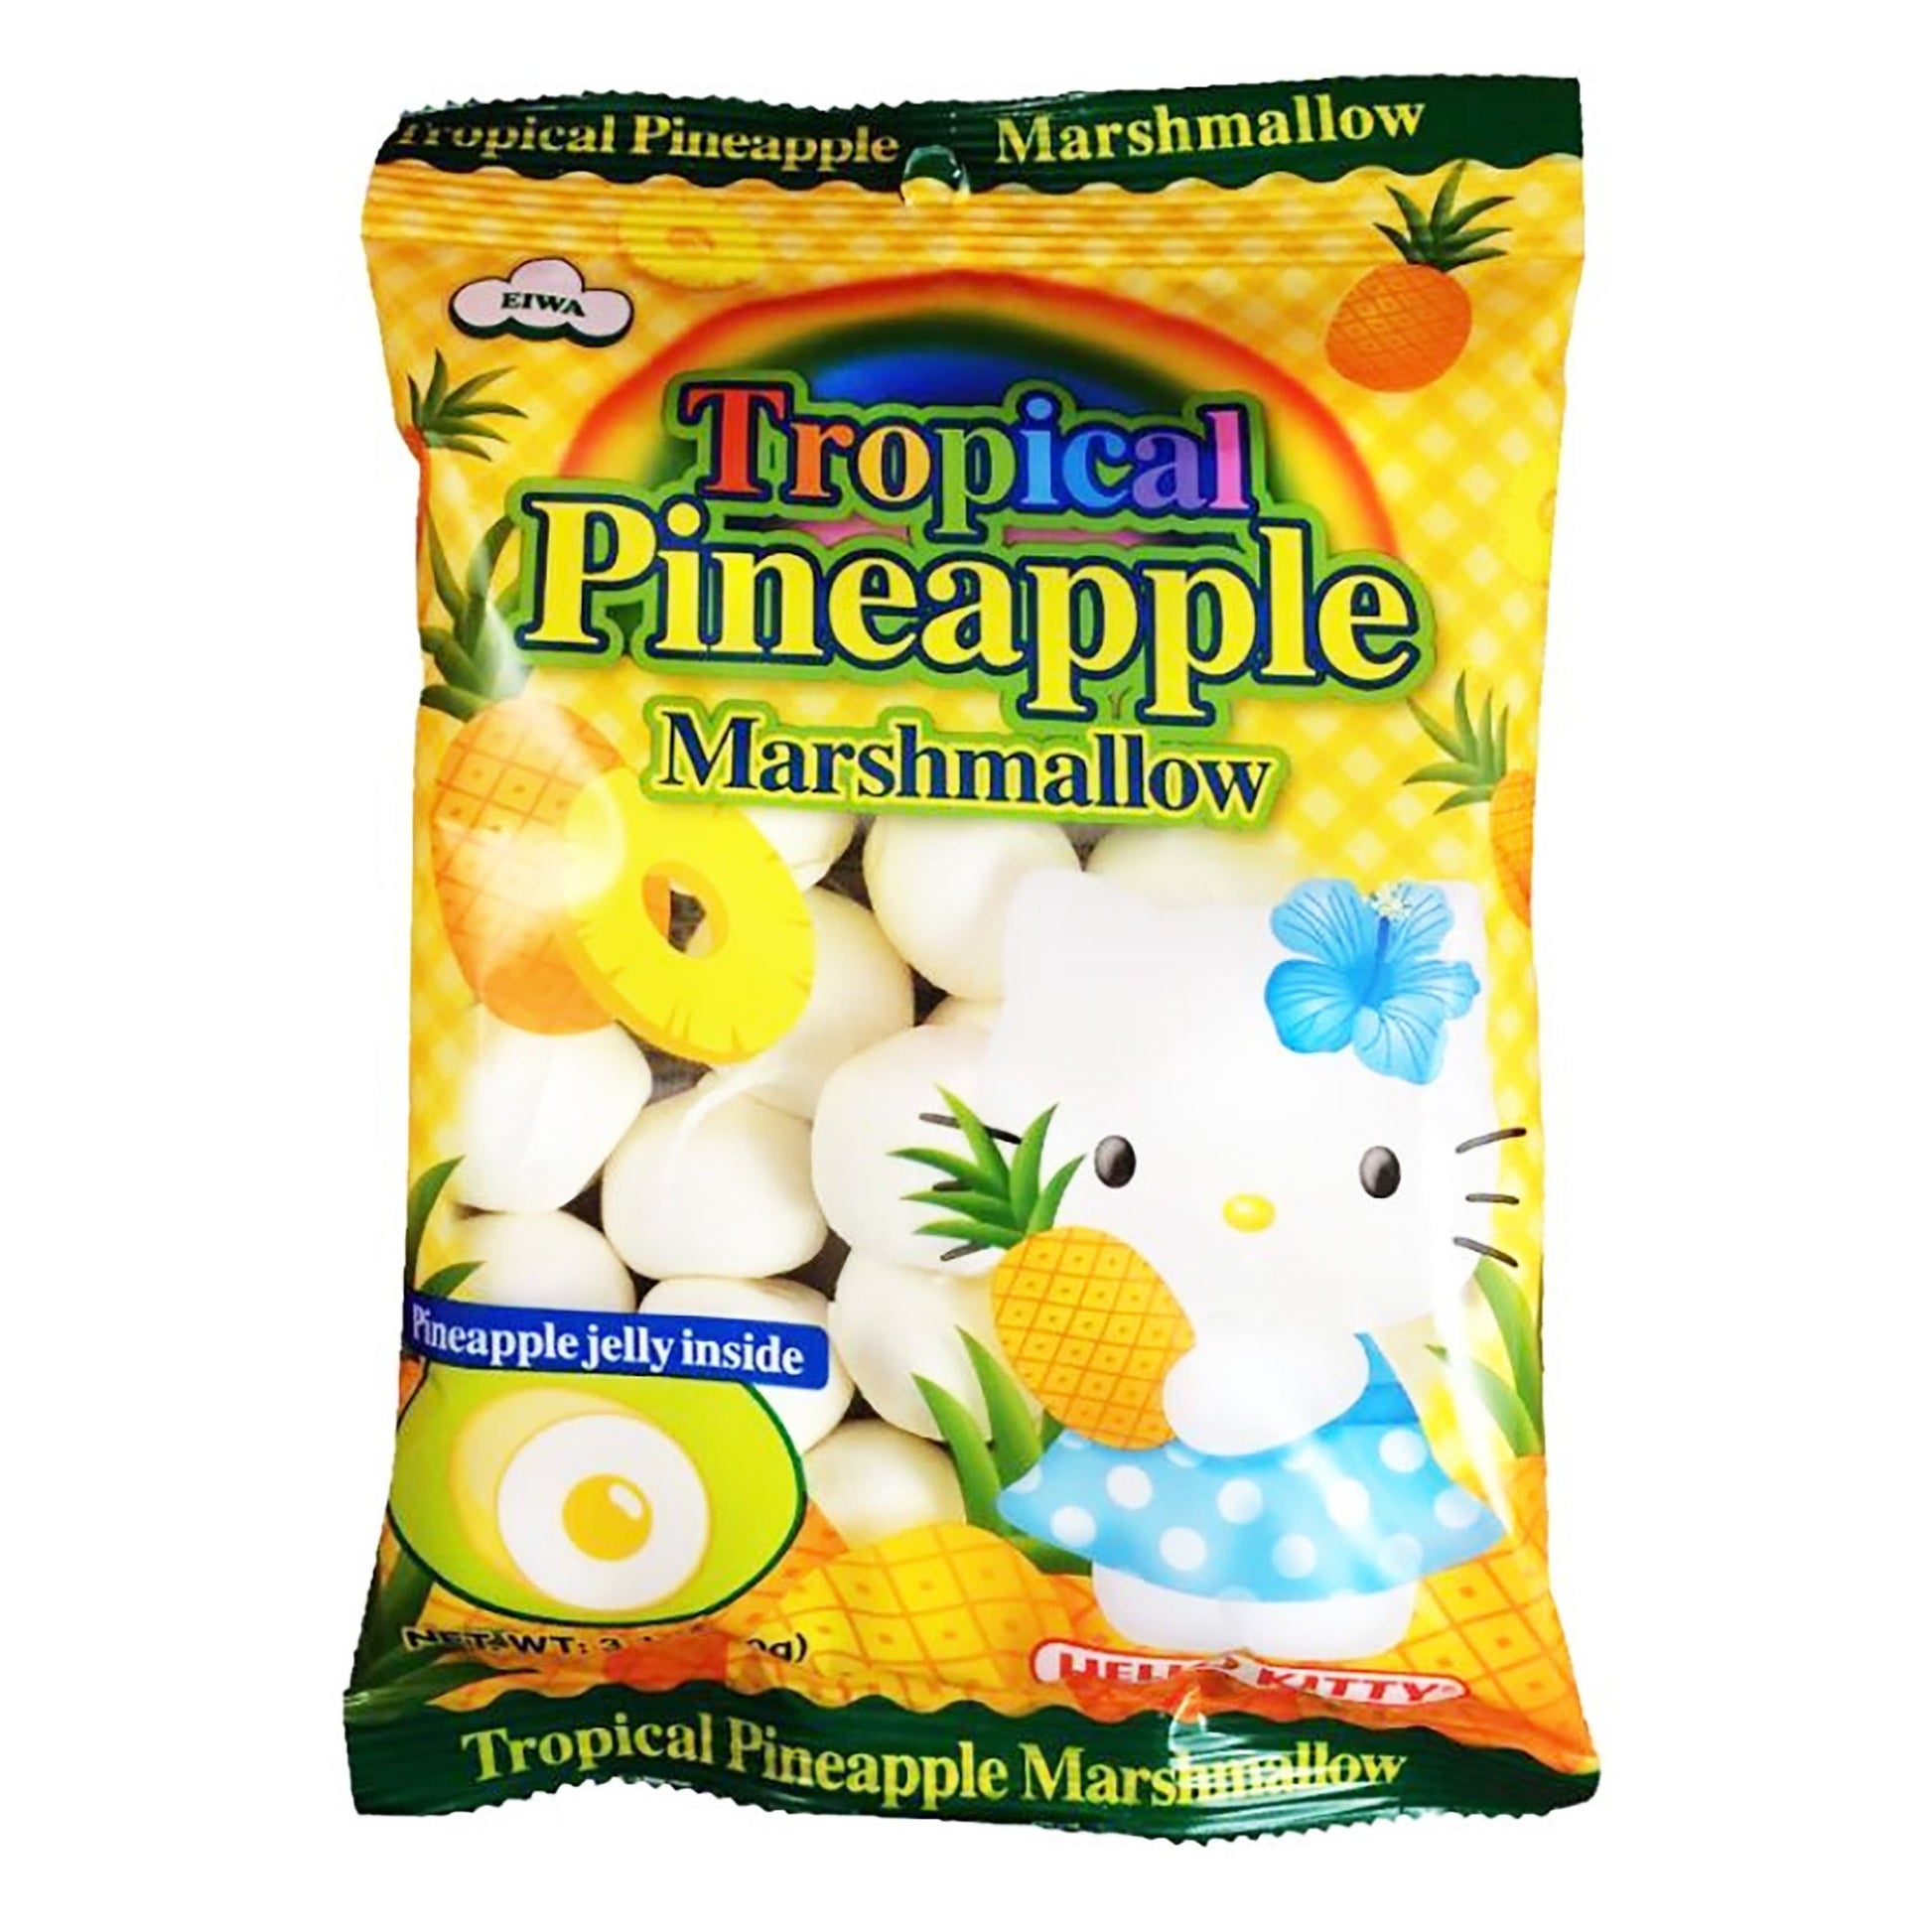 Front graphic image of Eiwa Tropical Marshmallow Pineapple 3.1oz